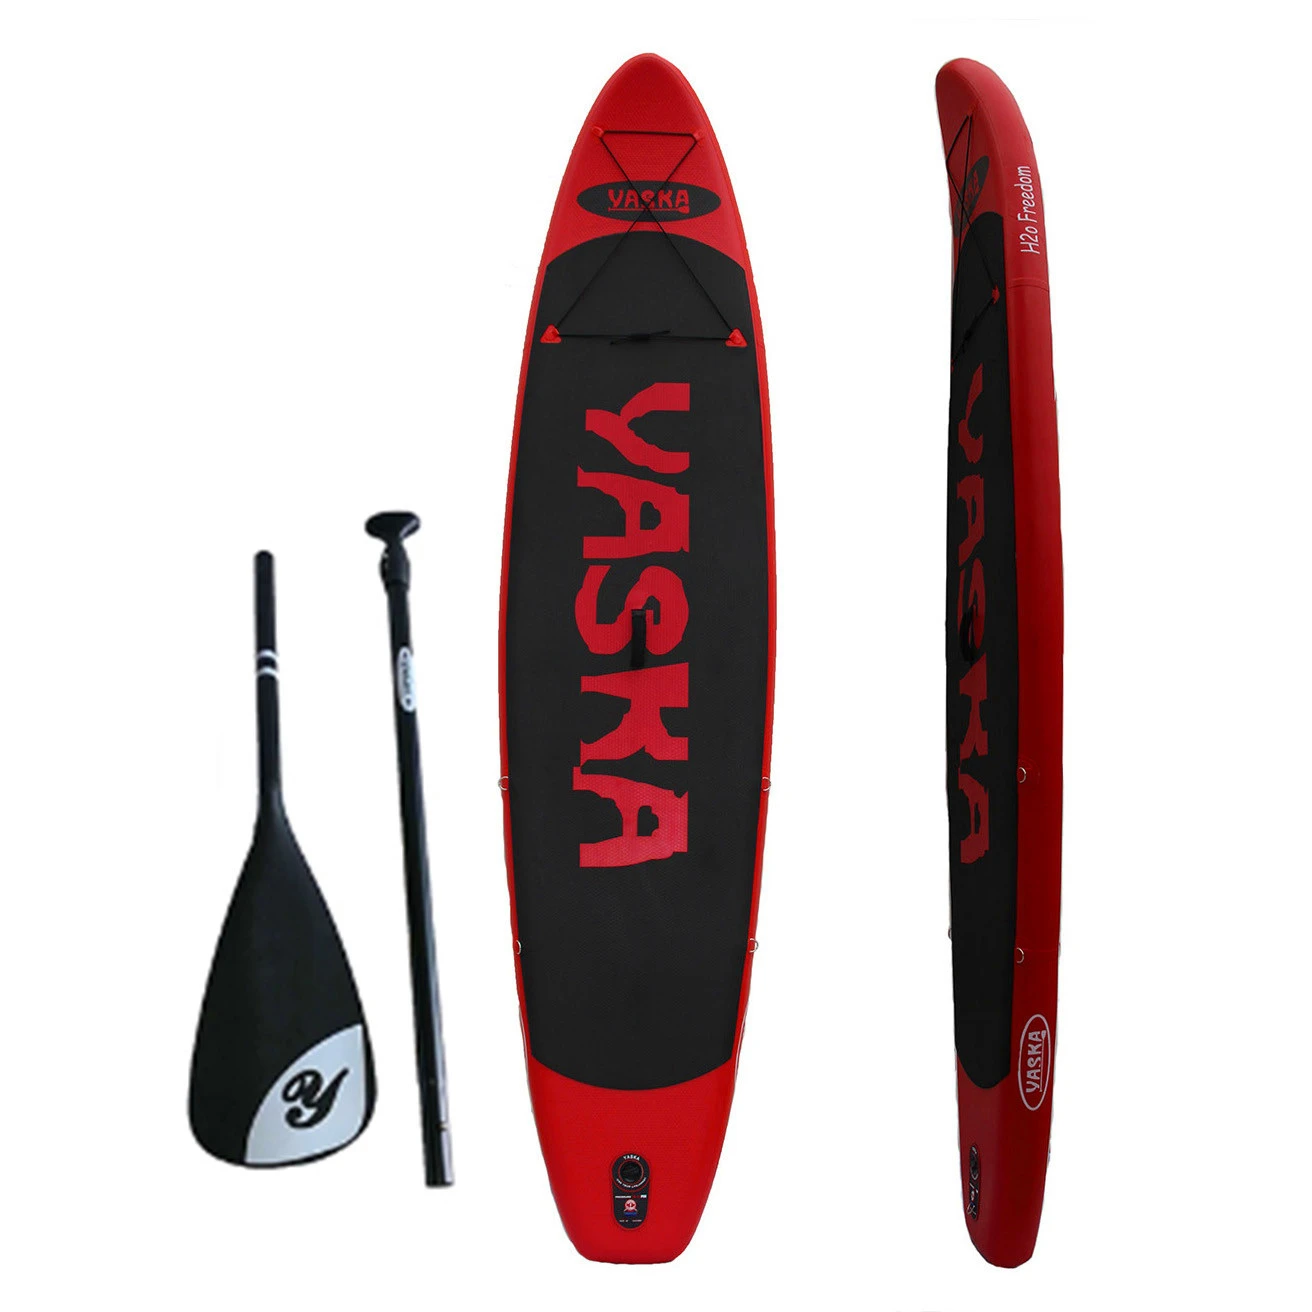 Wholesale High quality Sup Surfboard Paddle boards